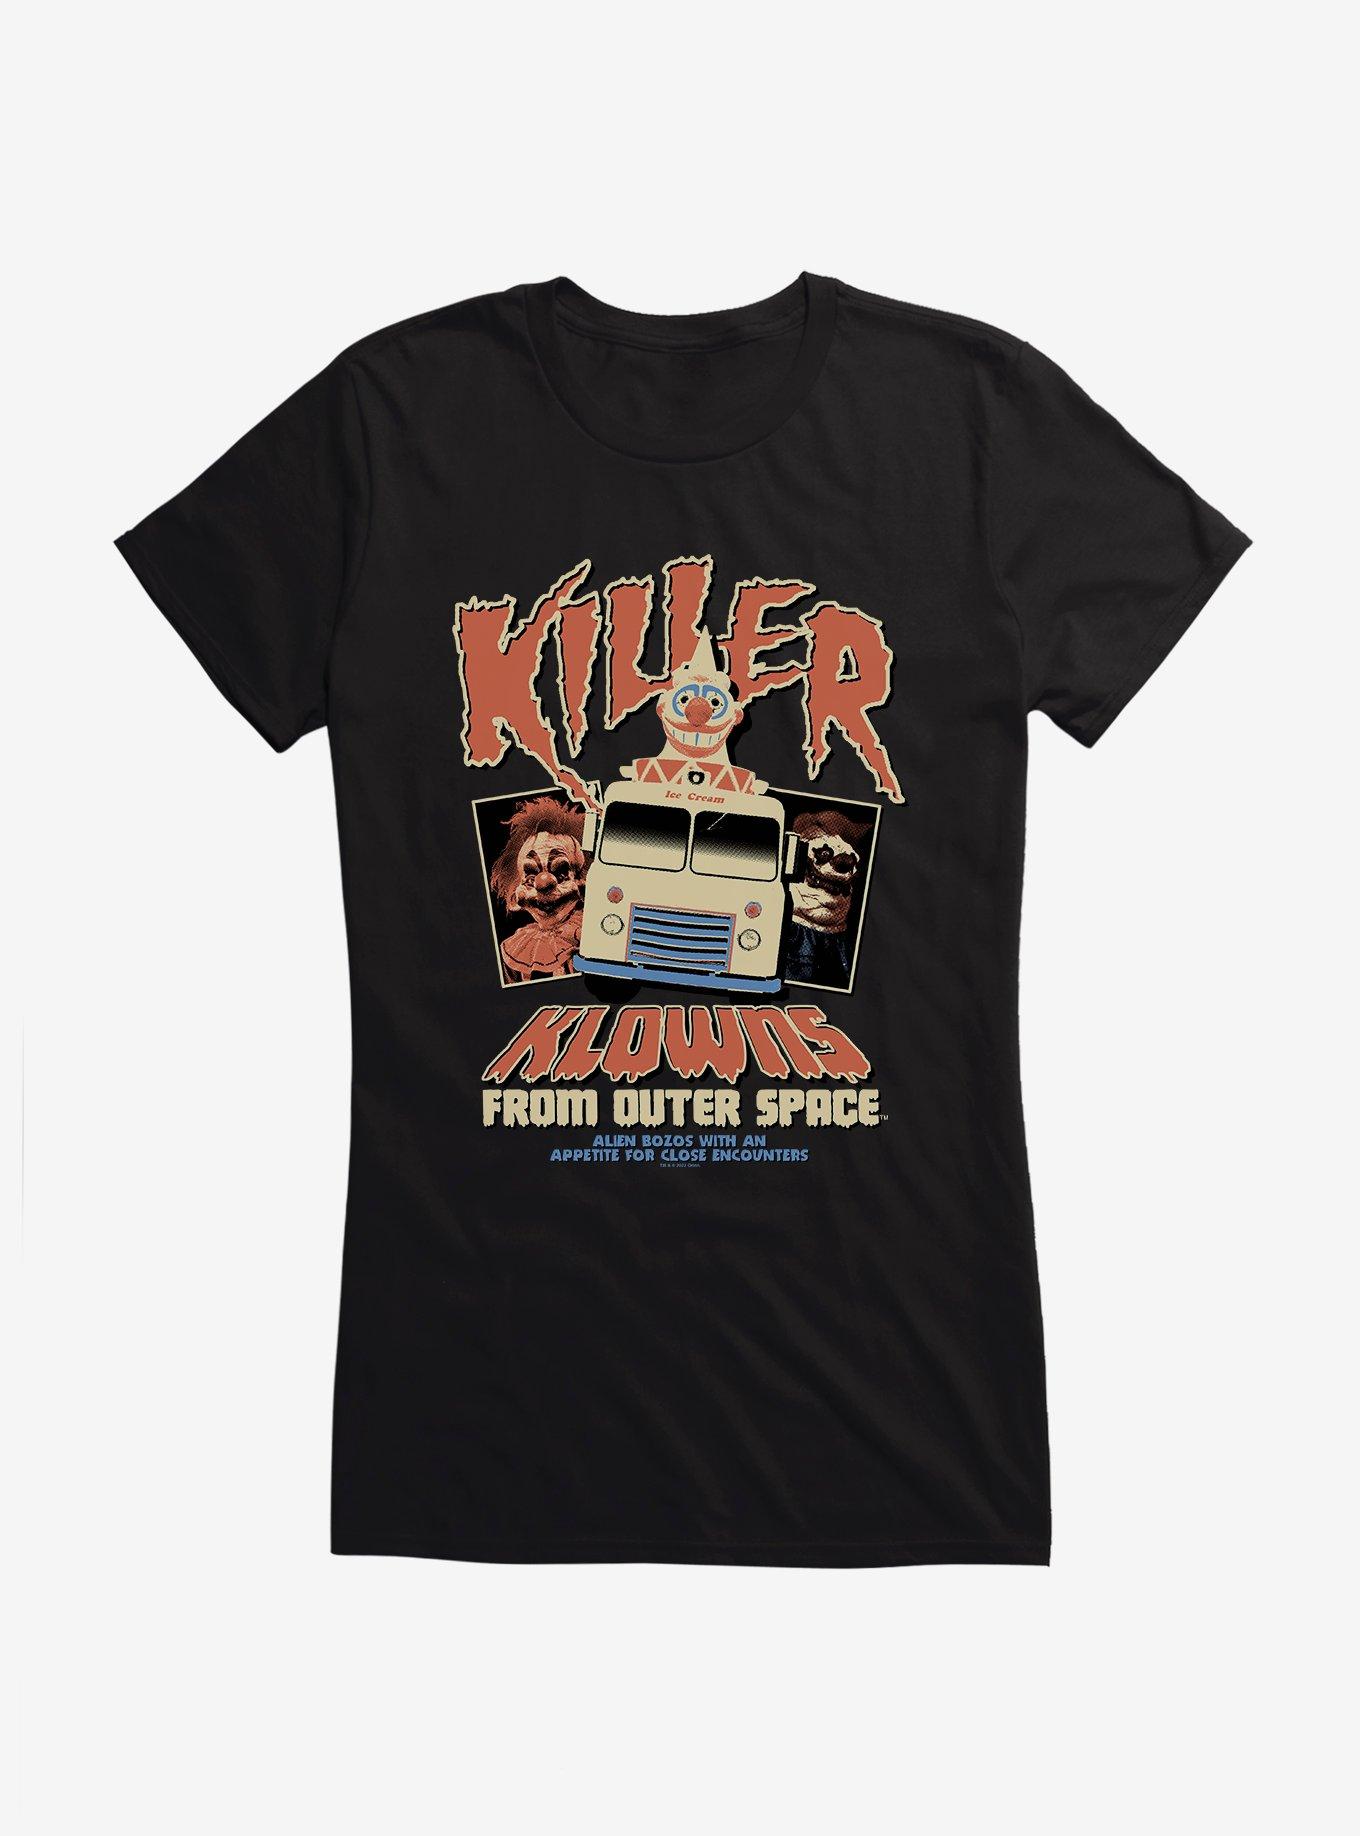 Killer Klowns From Outer Space Vintage Movie Poster Girls T-Shirt